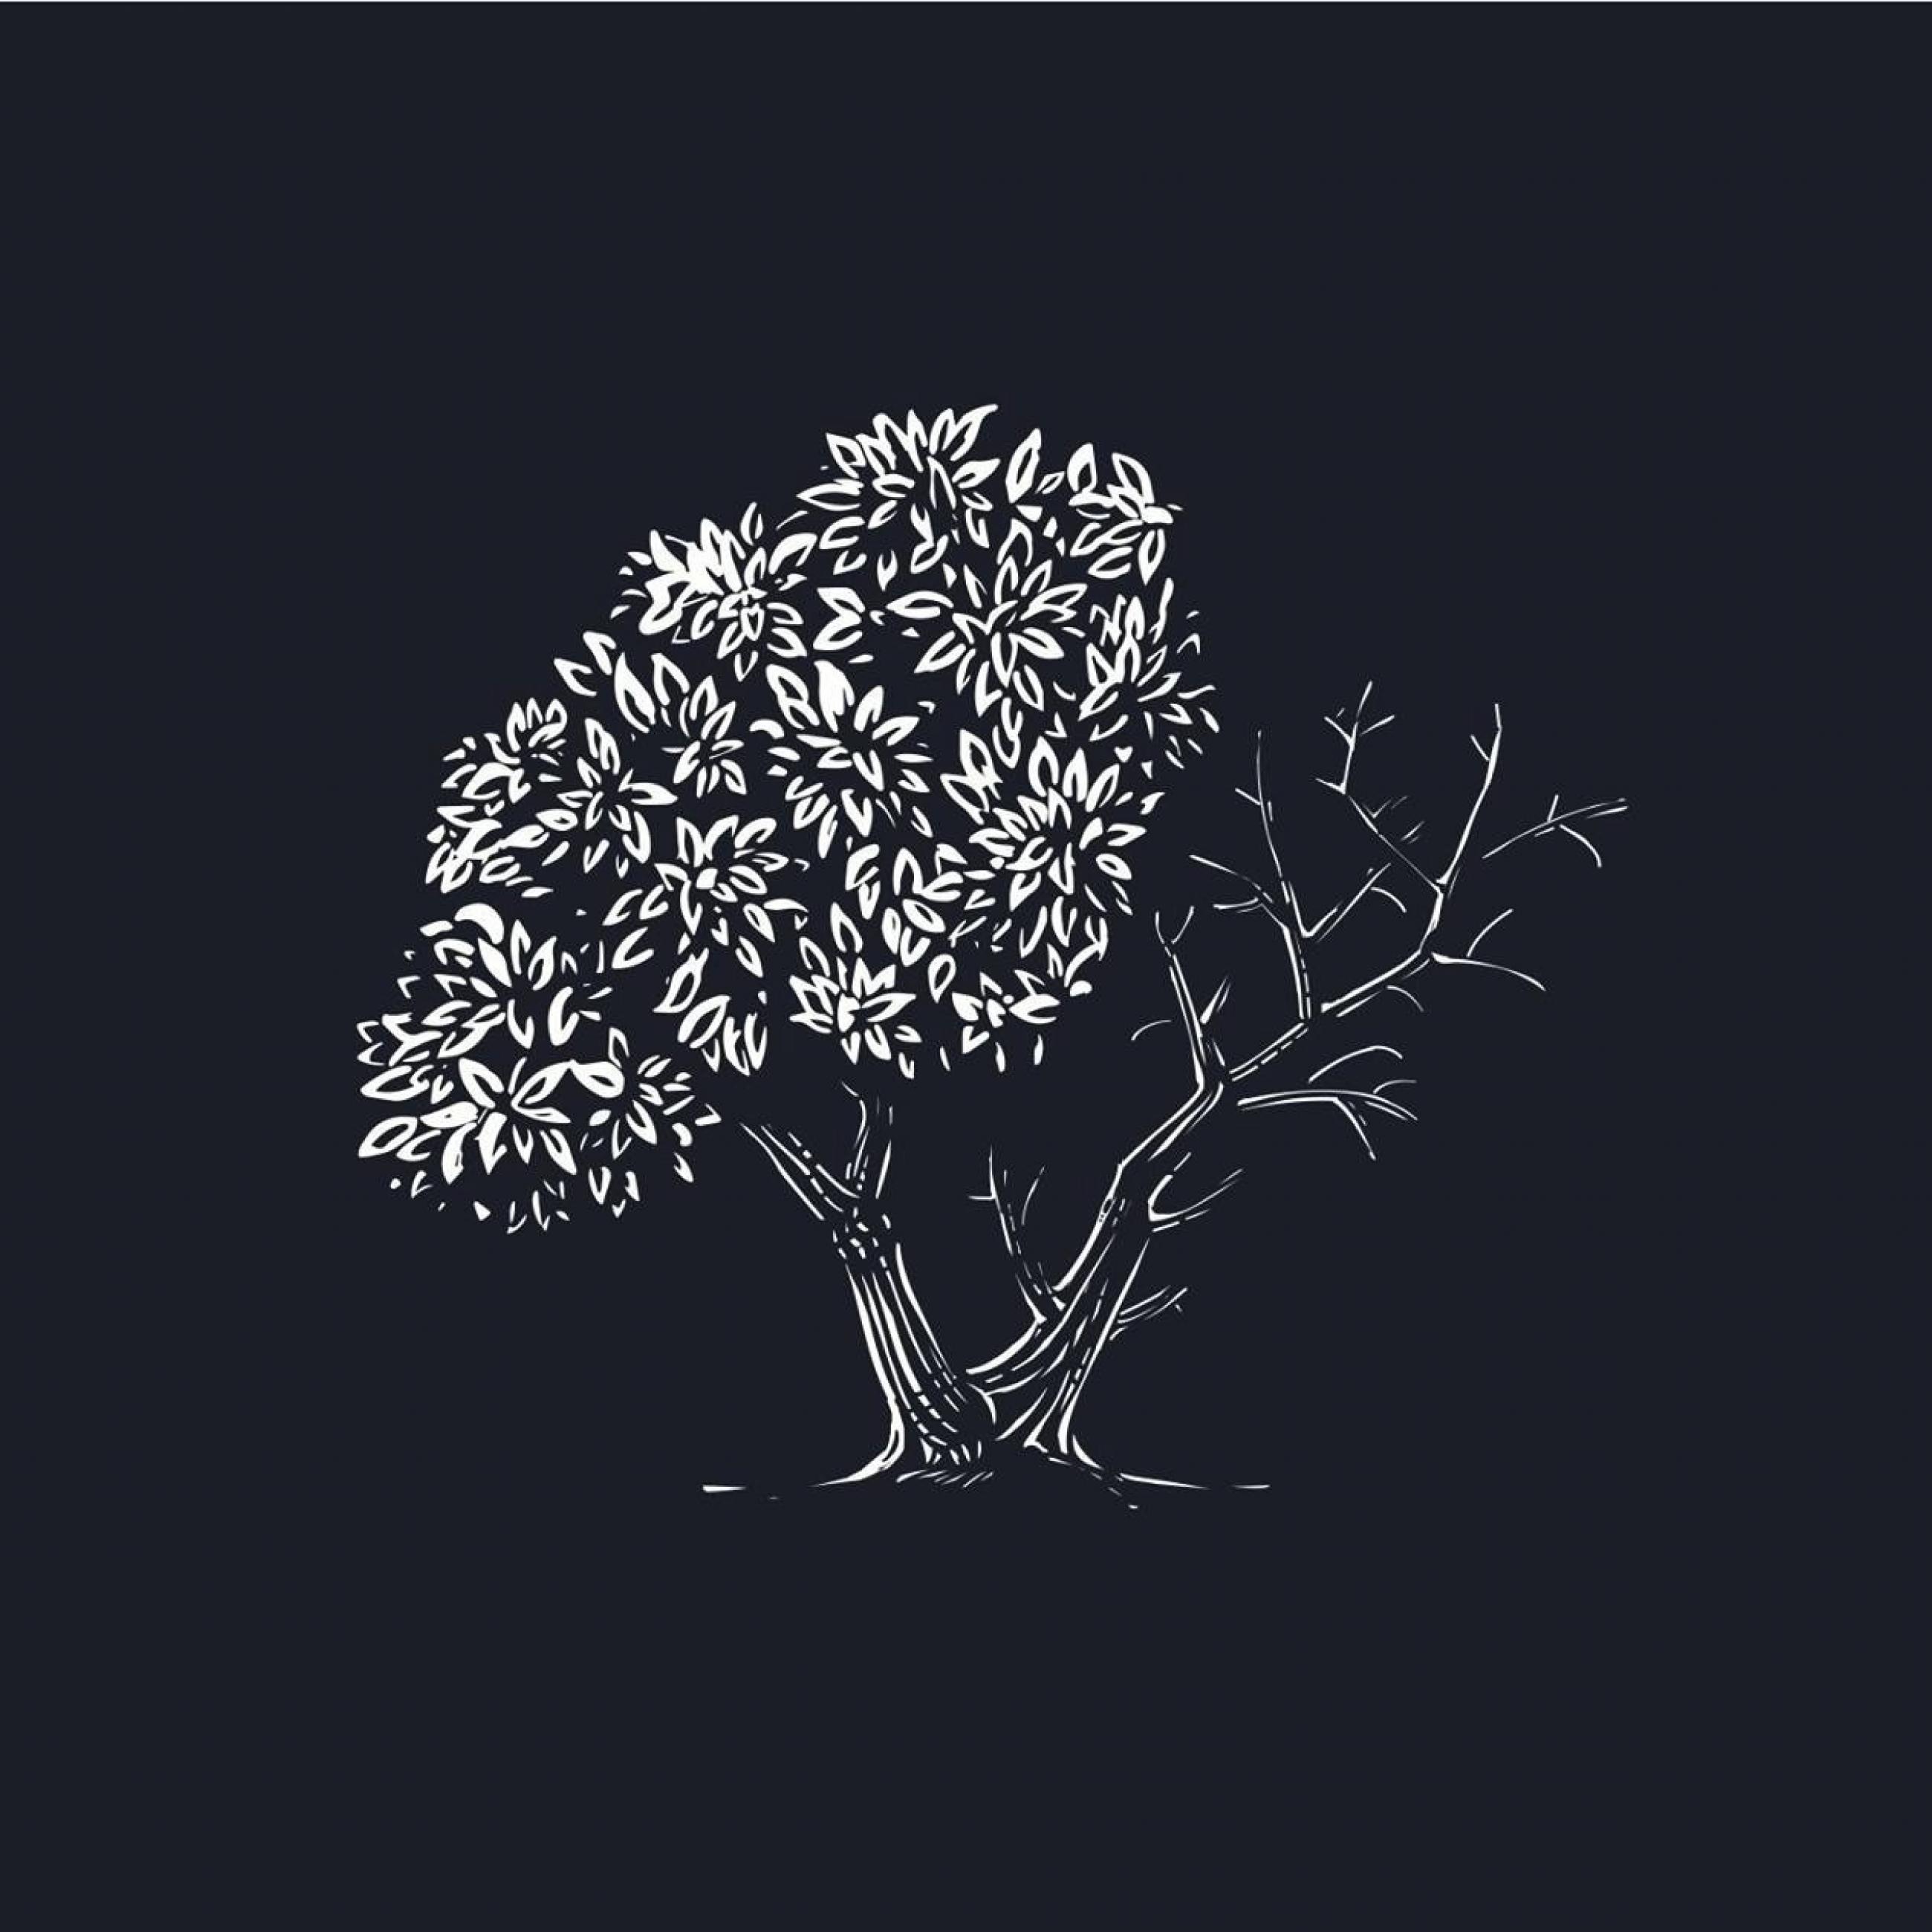 a sketch of a tree done in white is seen against a deep navy blue blackground